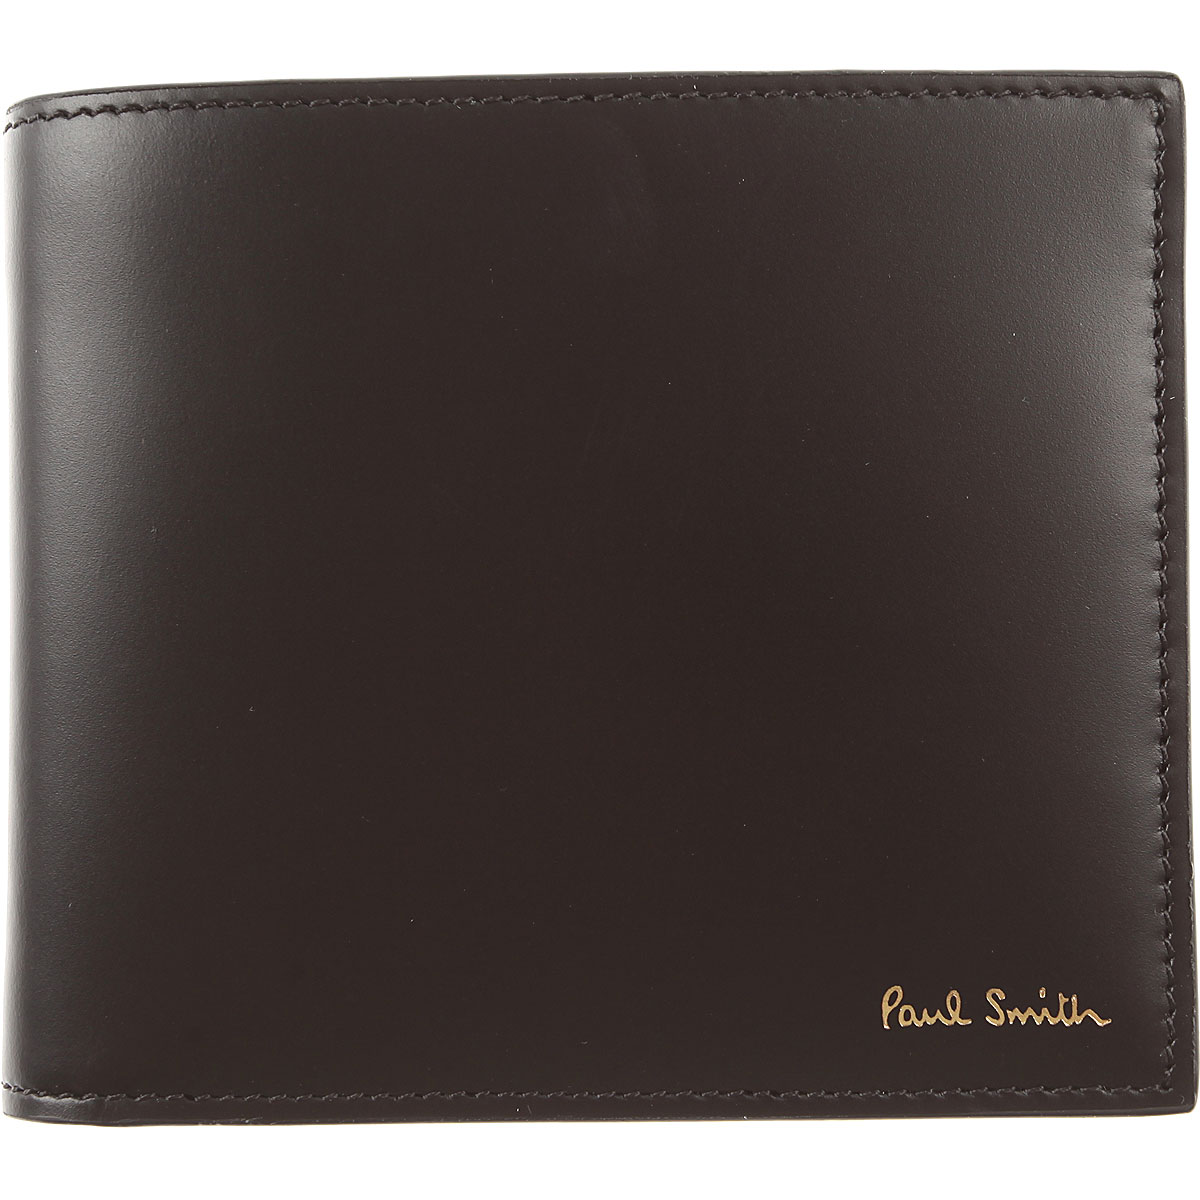 Mens Wallets Paul Smith, Style code: m1a-4832-anlady